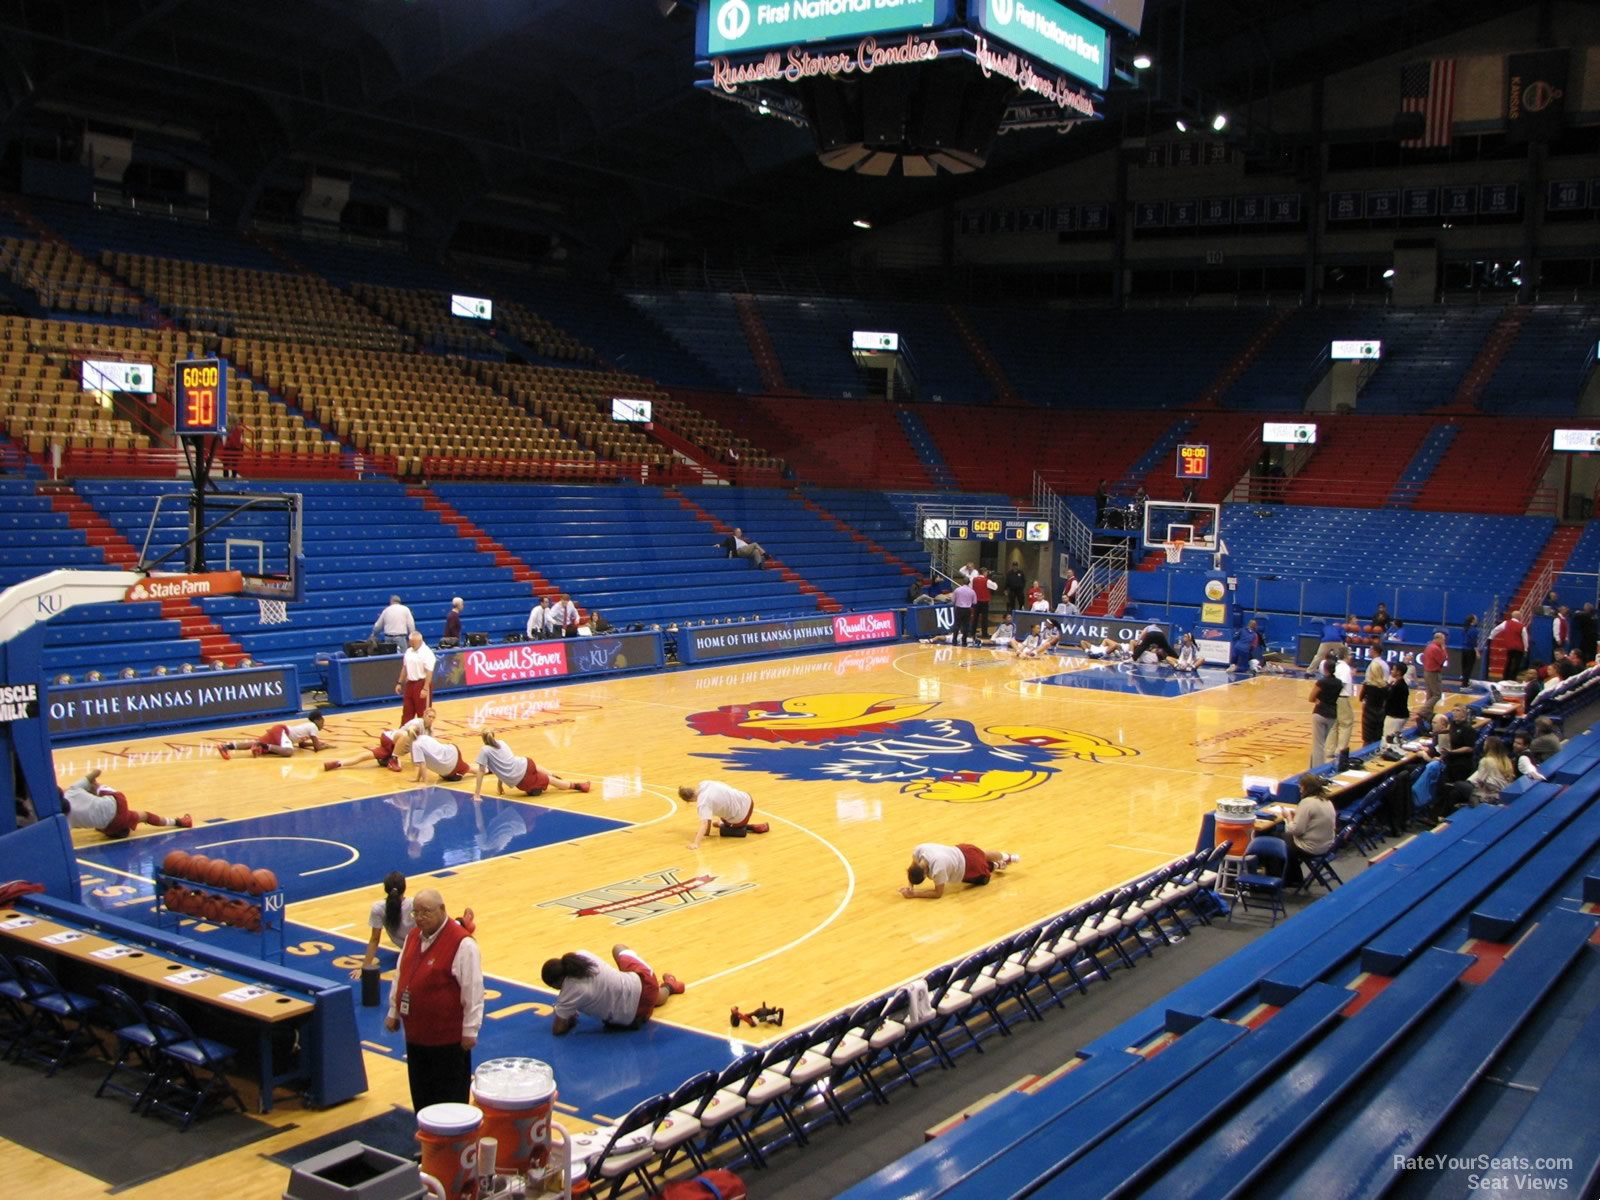 section v, row 9 seat view  - allen fieldhouse